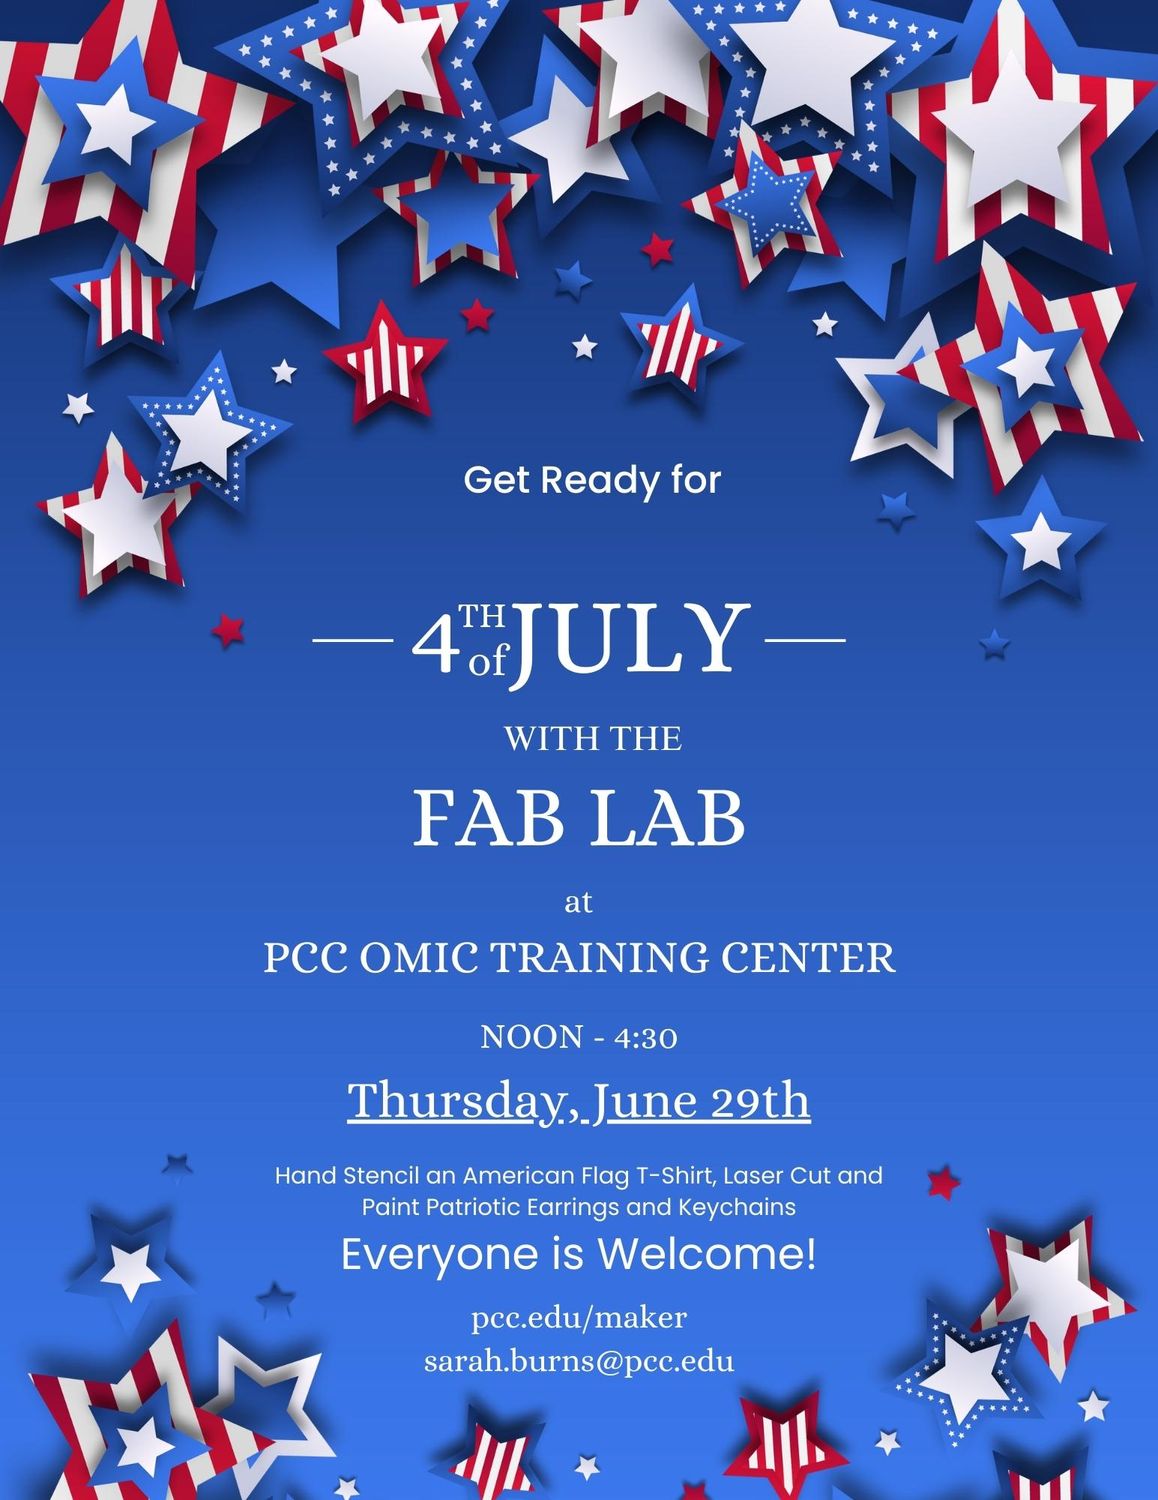 Get ready for the 4th of July with the Fab Lab at the PCC OMIC Training Center. 12:00 to 4:30 PM Thursday, June 29th Hand stencil an American flag t-shirt, laser cut and paint patriotic earrings and keychains. Everyone is welcome! pcc.edu/maker sarah.burns@pcc.edu